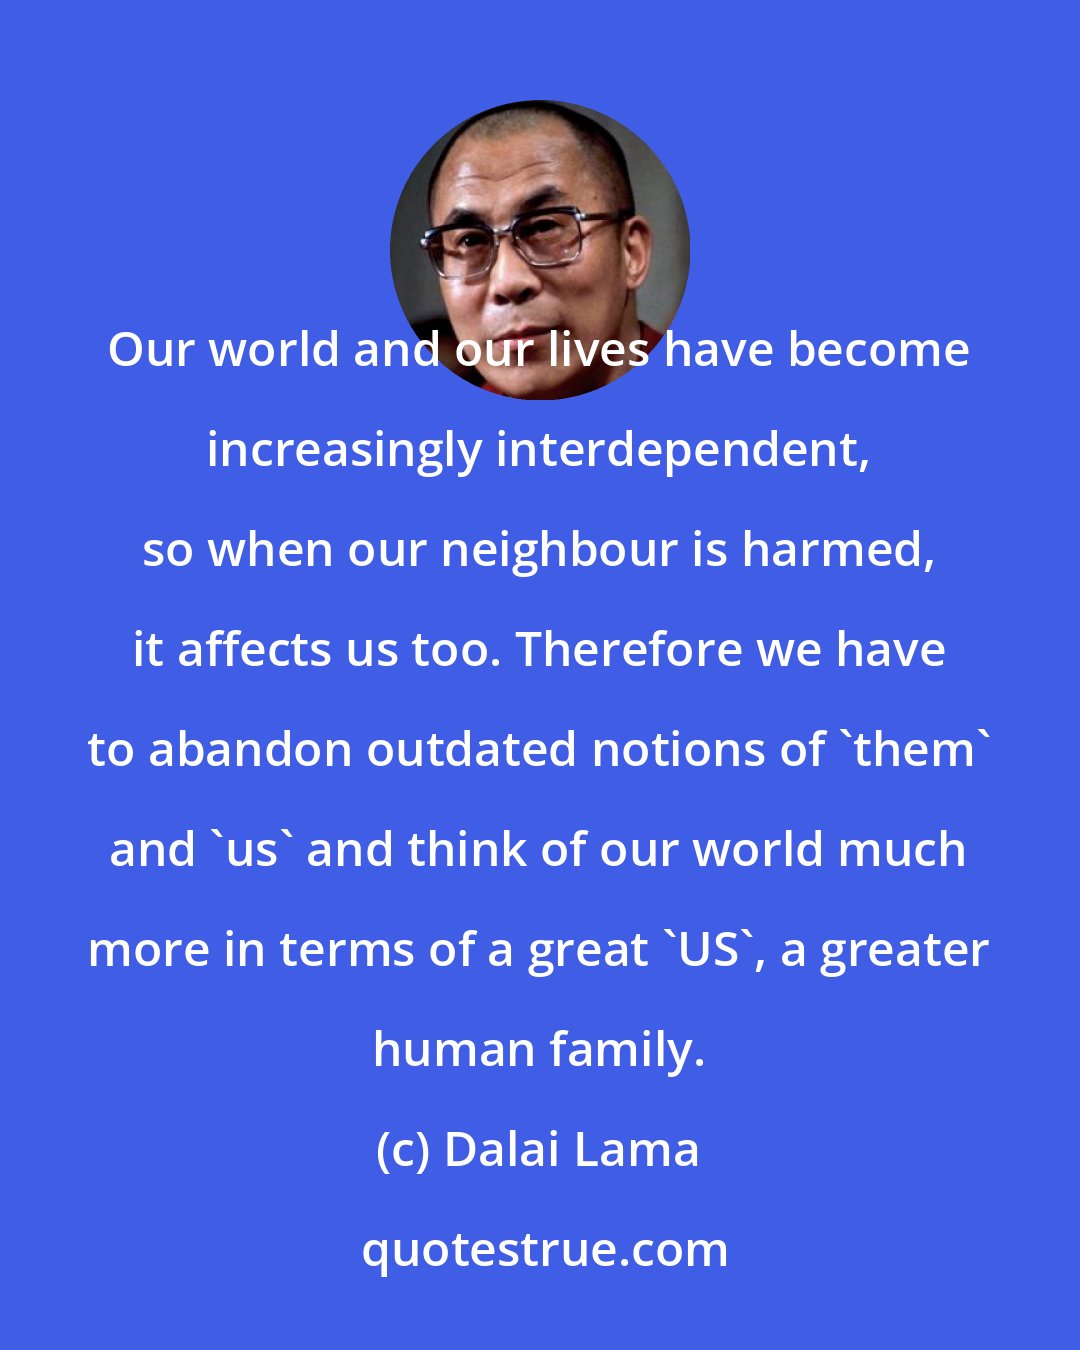 Dalai Lama: Our world and our lives have become increasingly interdependent, so when our neighbour is harmed, it affects us too. Therefore we have to abandon outdated notions of 'them' and 'us' and think of our world much more in terms of a great 'US', a greater human family.